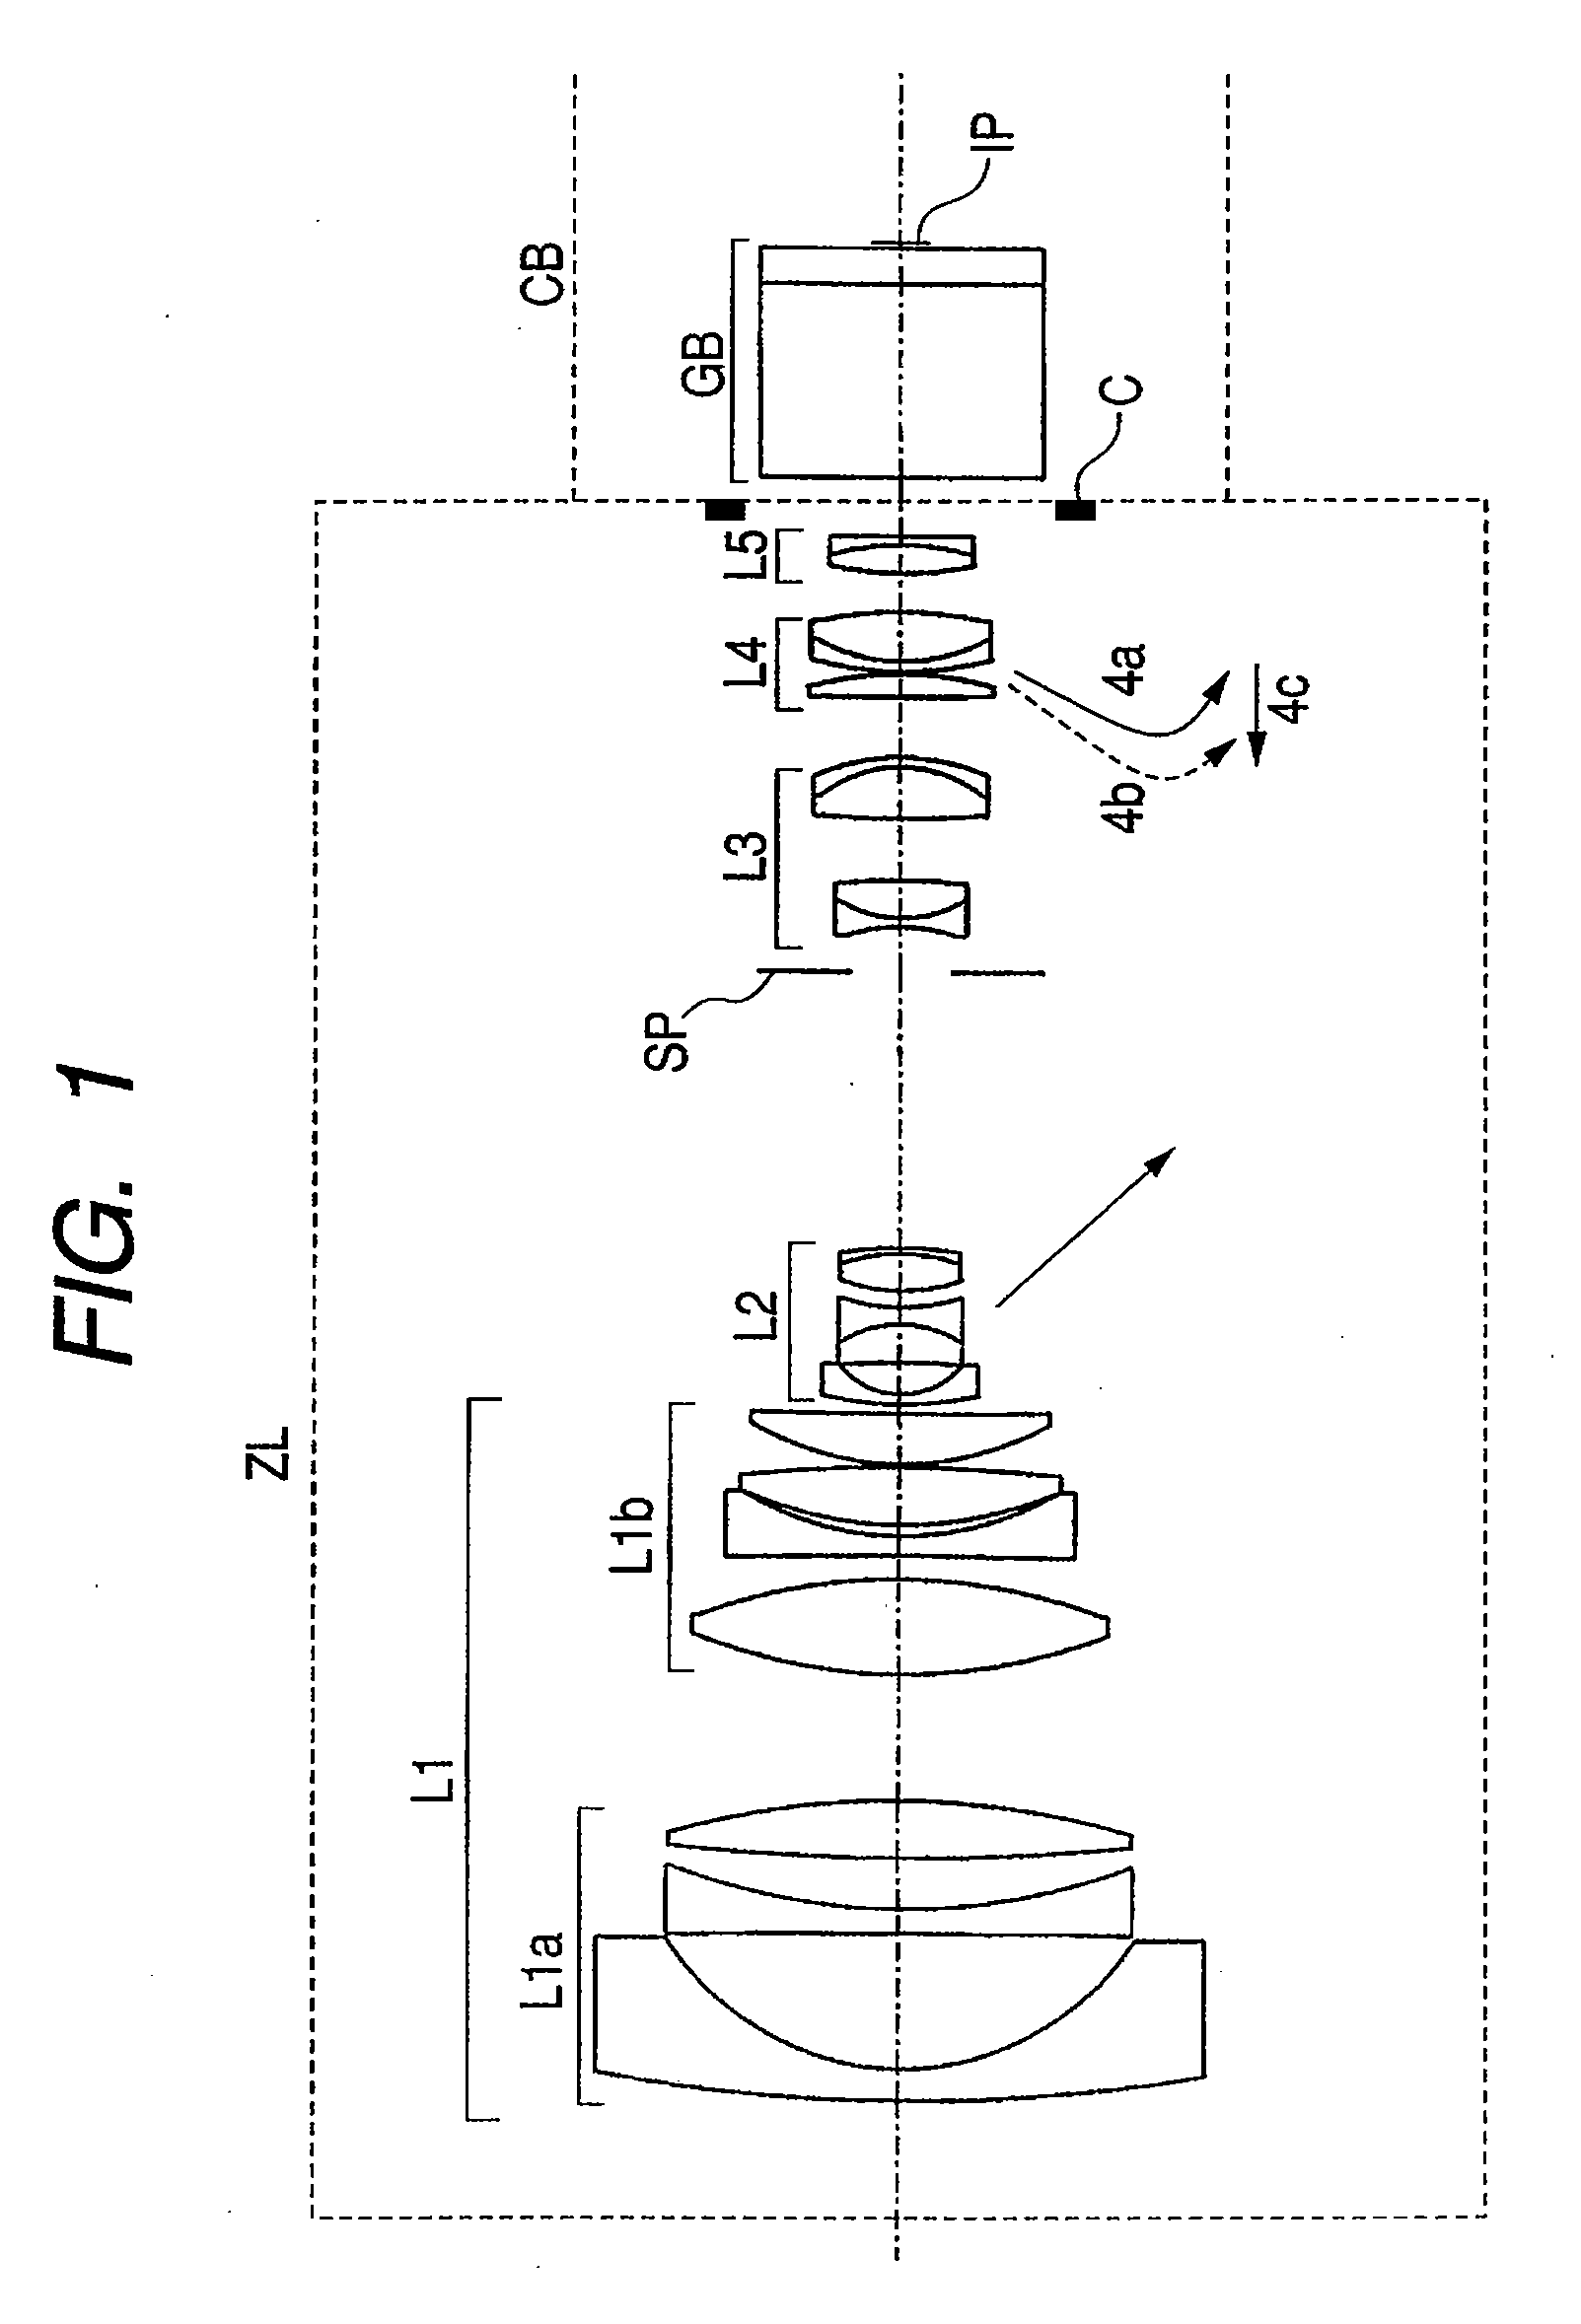 Zoom lens and image pickup apparatus equipped with same